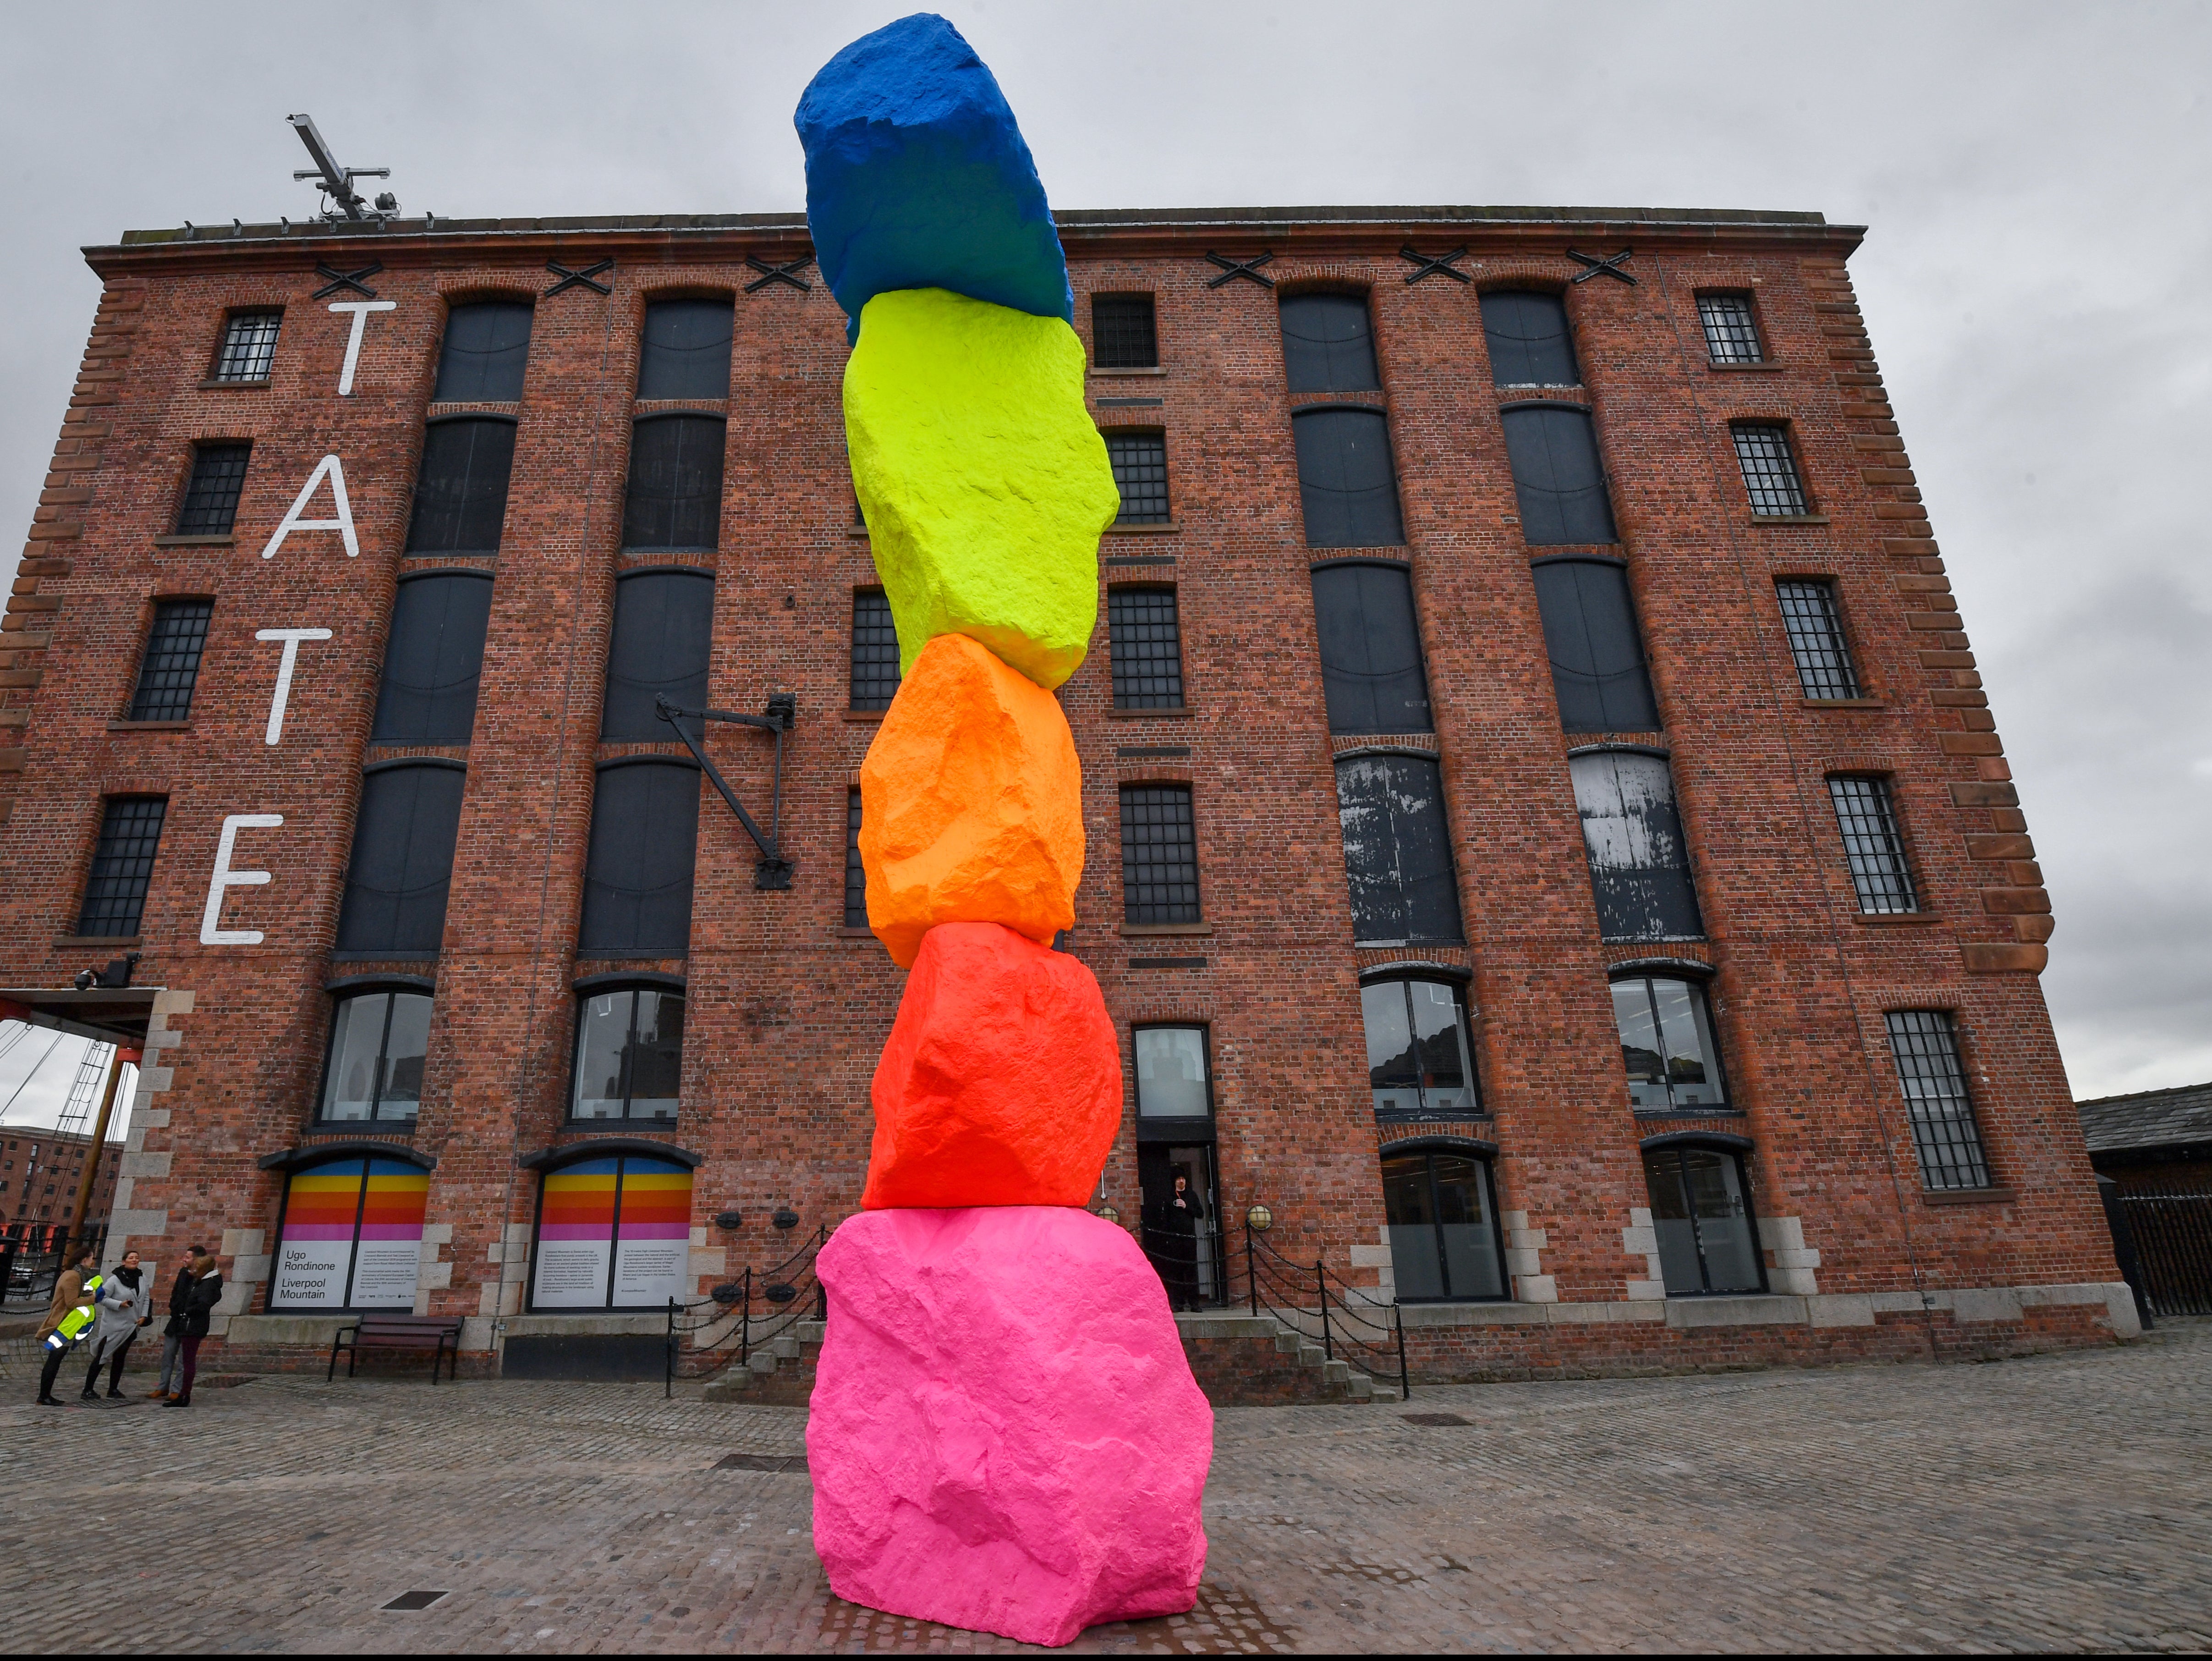 Tate Liverpool will host the 2022 Turner Prize